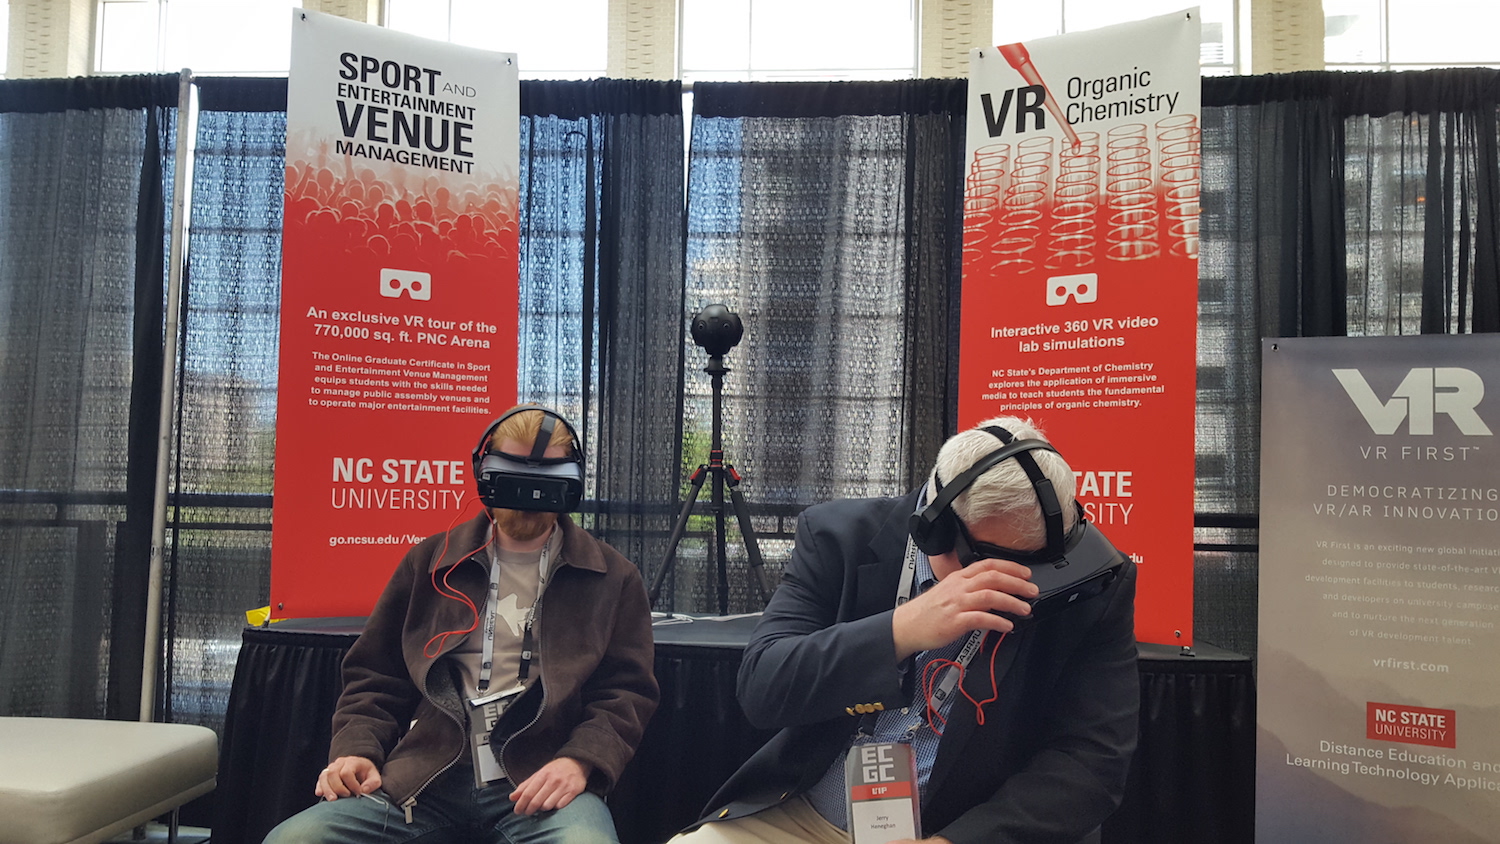 ECGC attendees experience the organic chemistry and Sport and Entertainment Venue Management VR modules.